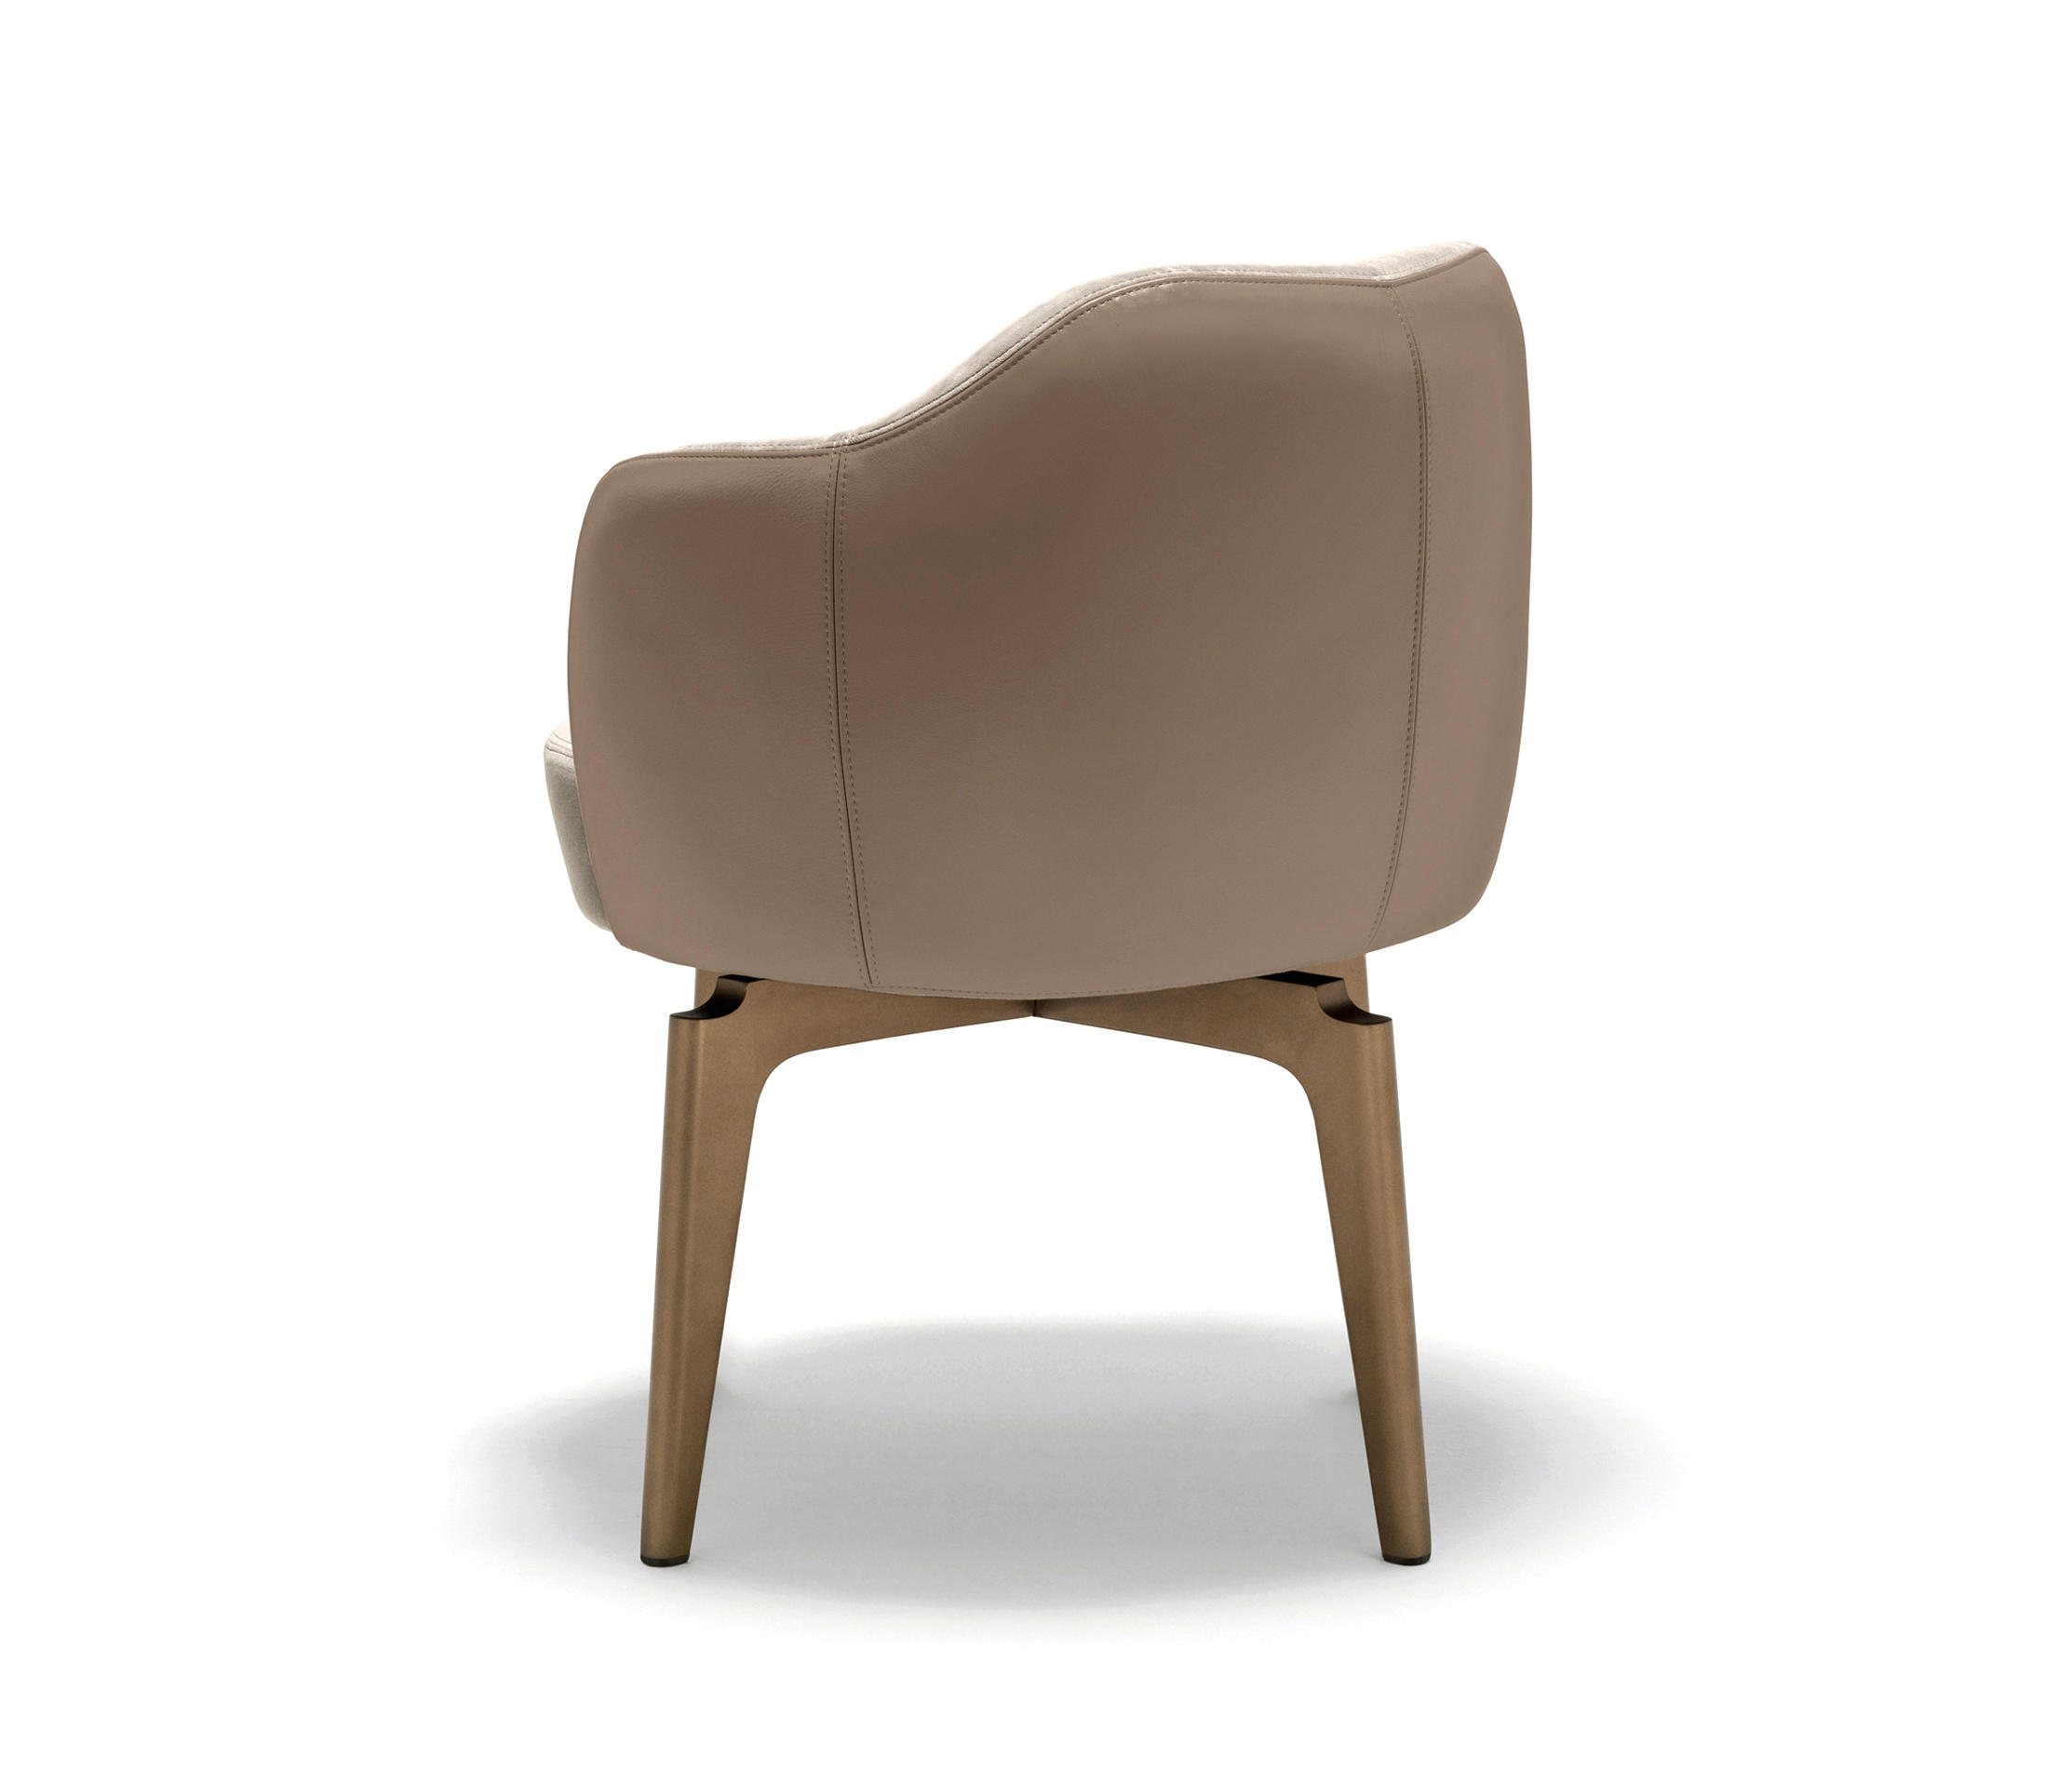 Small armchairs elisa small armchair | visitors chairs / side chairs | giorgetti OSFFQTB